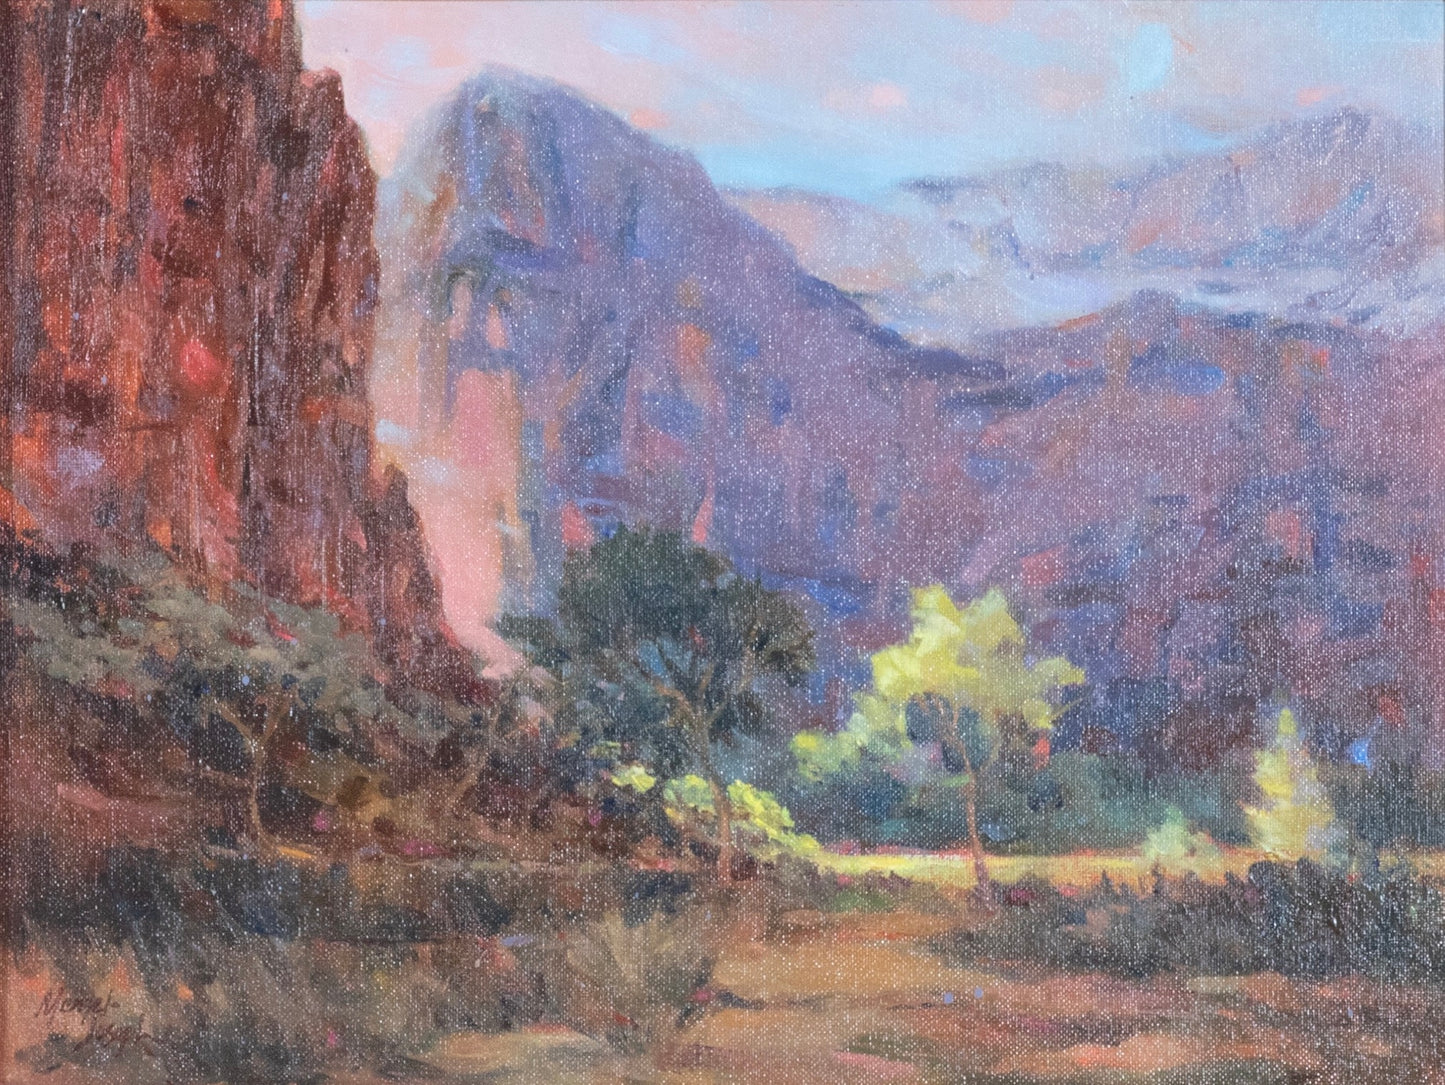 James Menzel-Joseph - Late Afternoon in Zion Valley 11.75” x 15.75